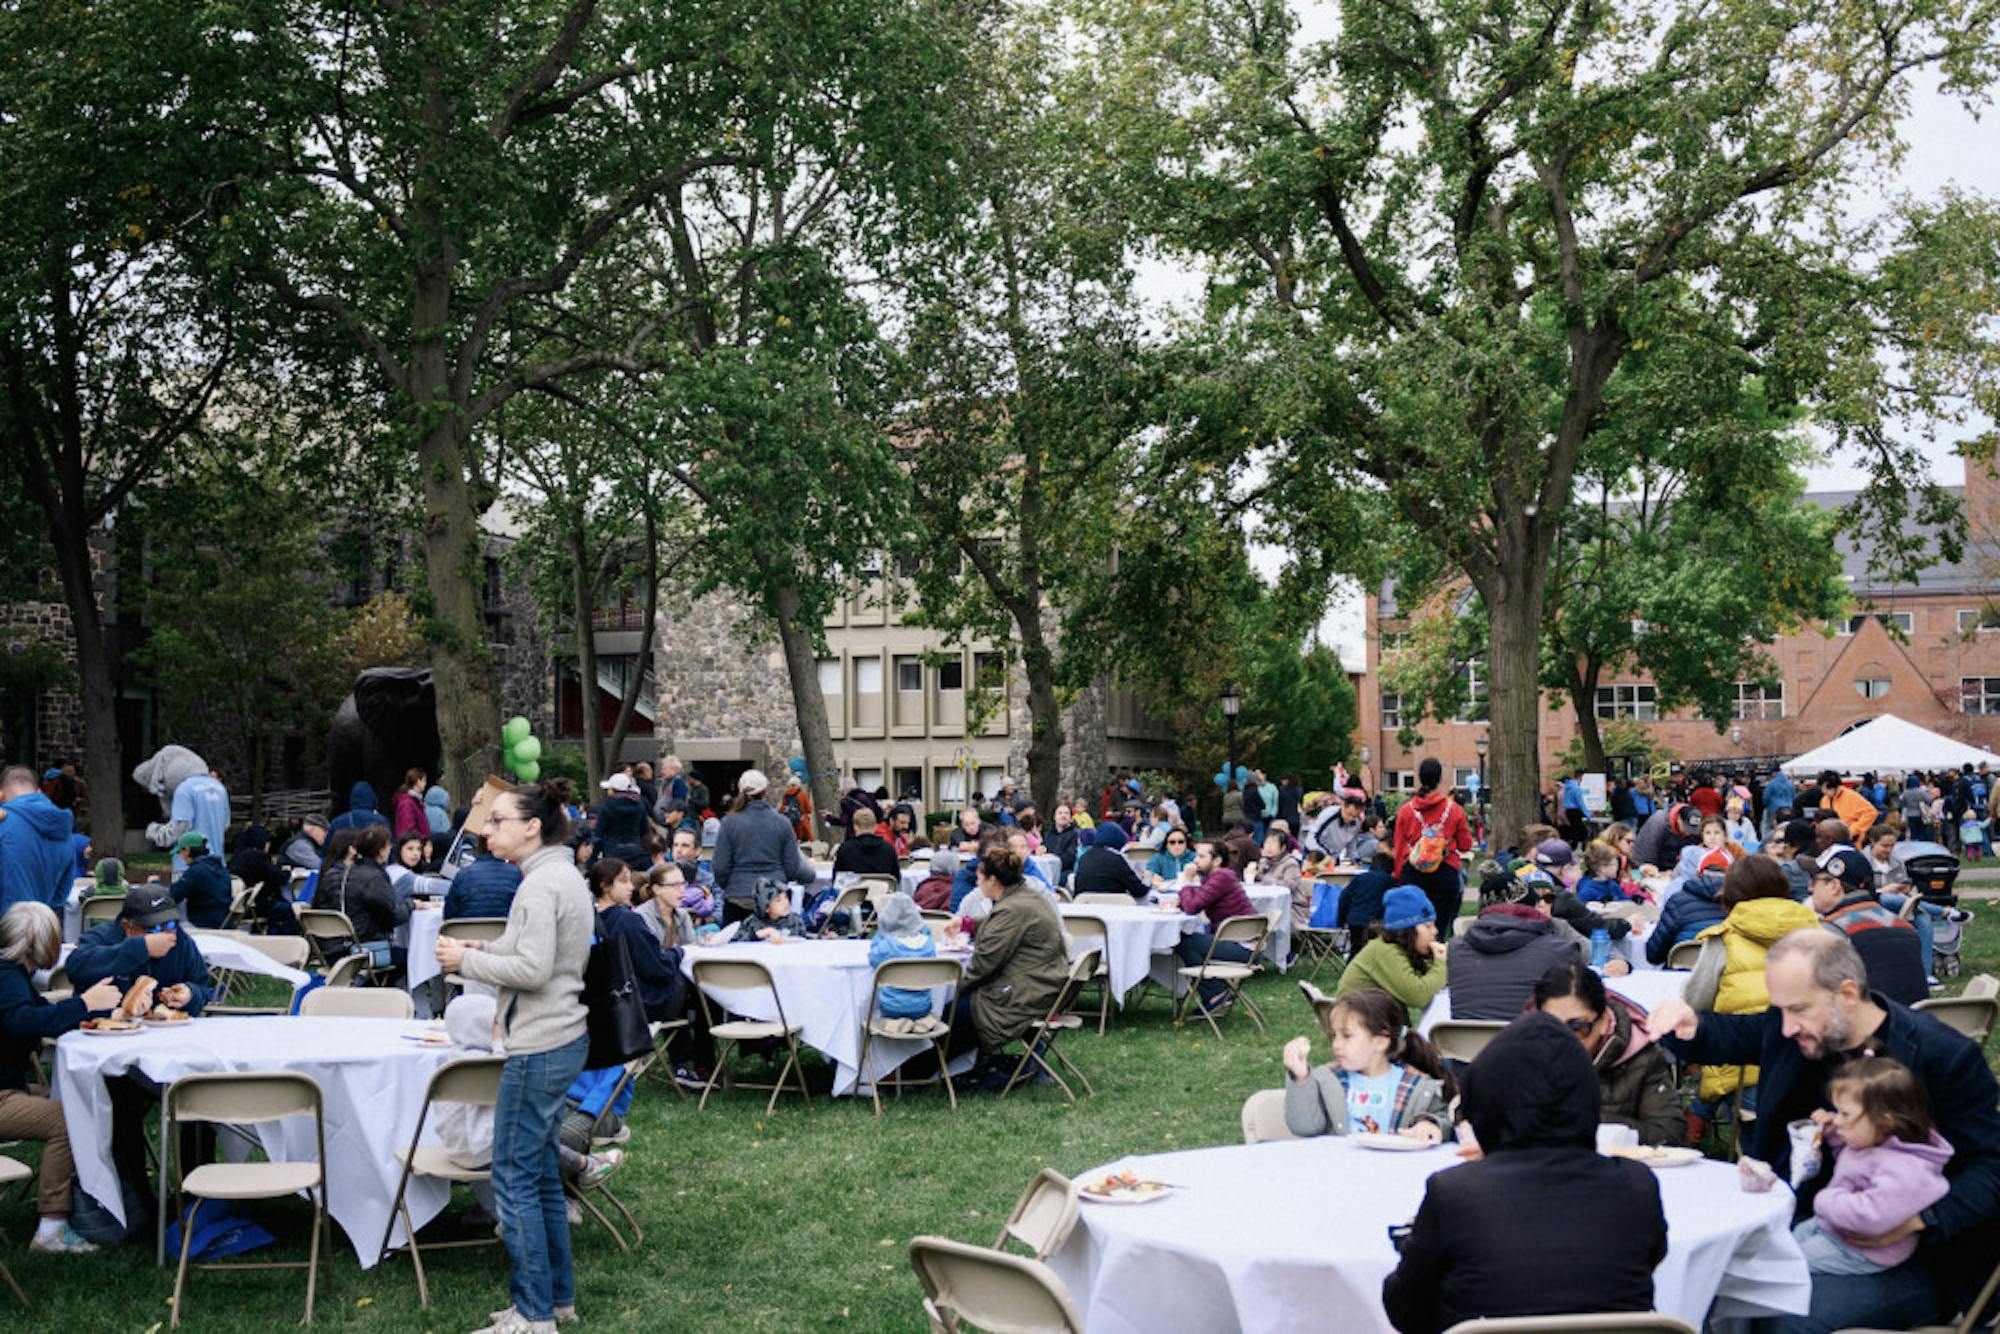 Community Day returns to Tufts campus after 2 years The Tufts Daily